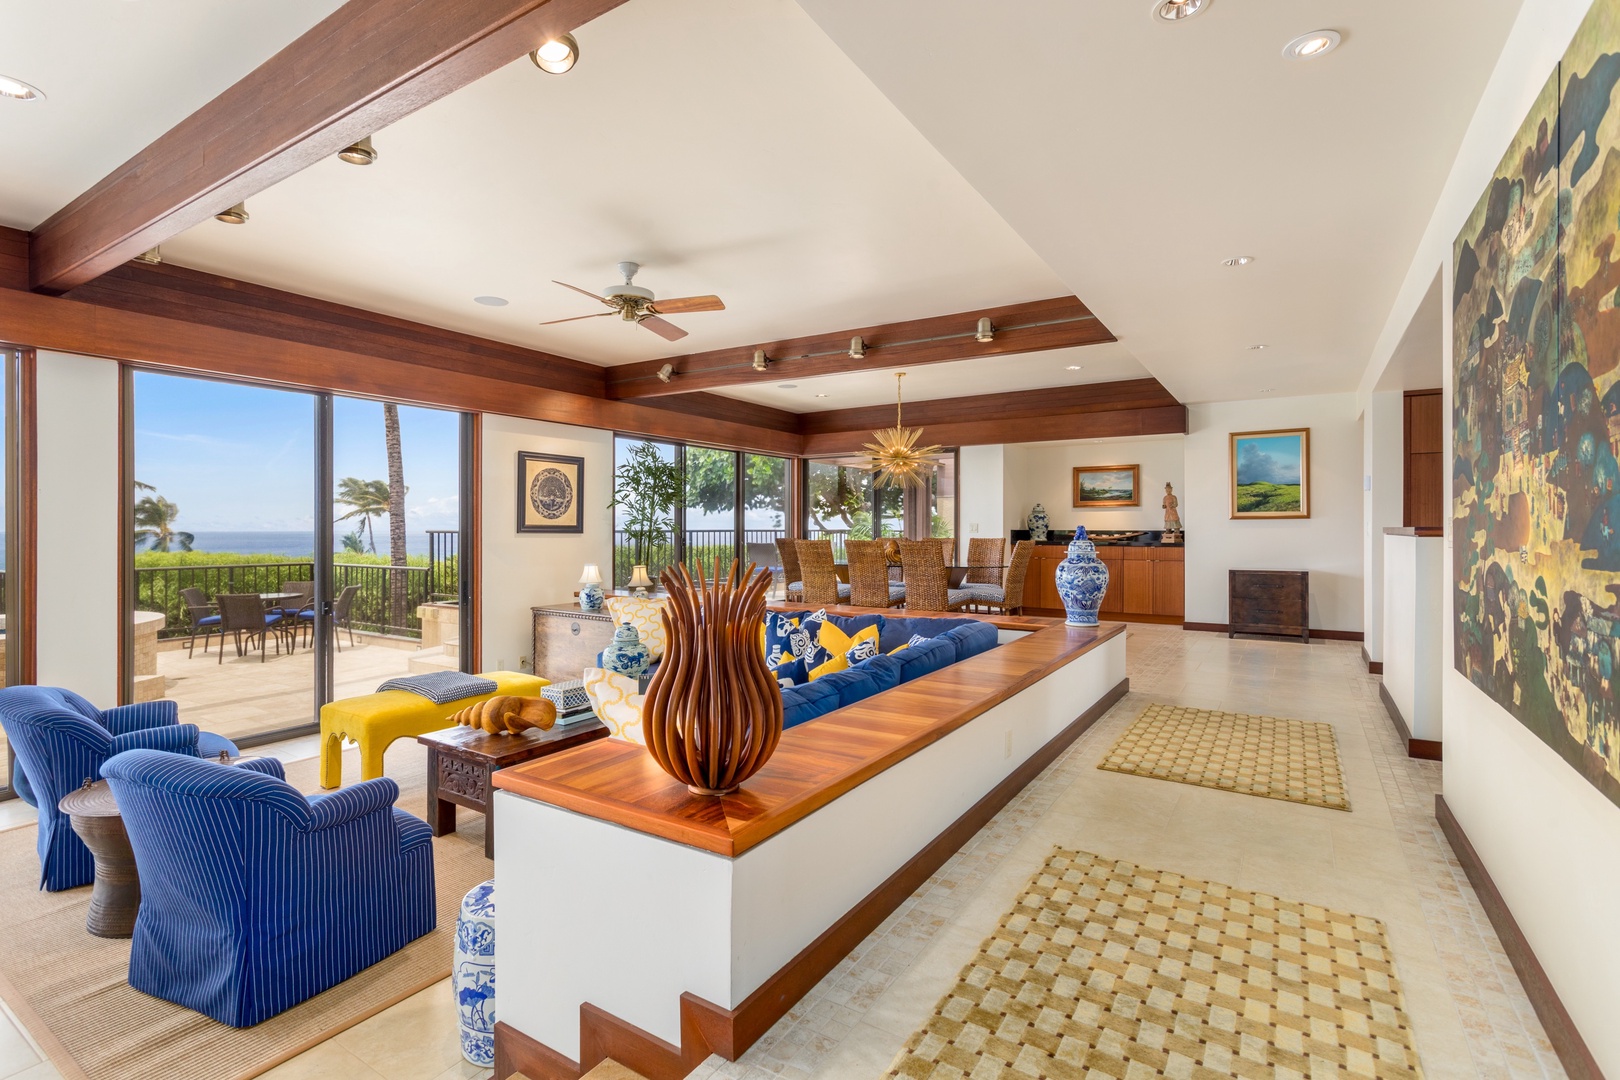 Kamuela Vacation Rentals, OFB 3BD Villas (39) at Mauna Kea Resort - View of generous great room with recessed living area and ocean views.